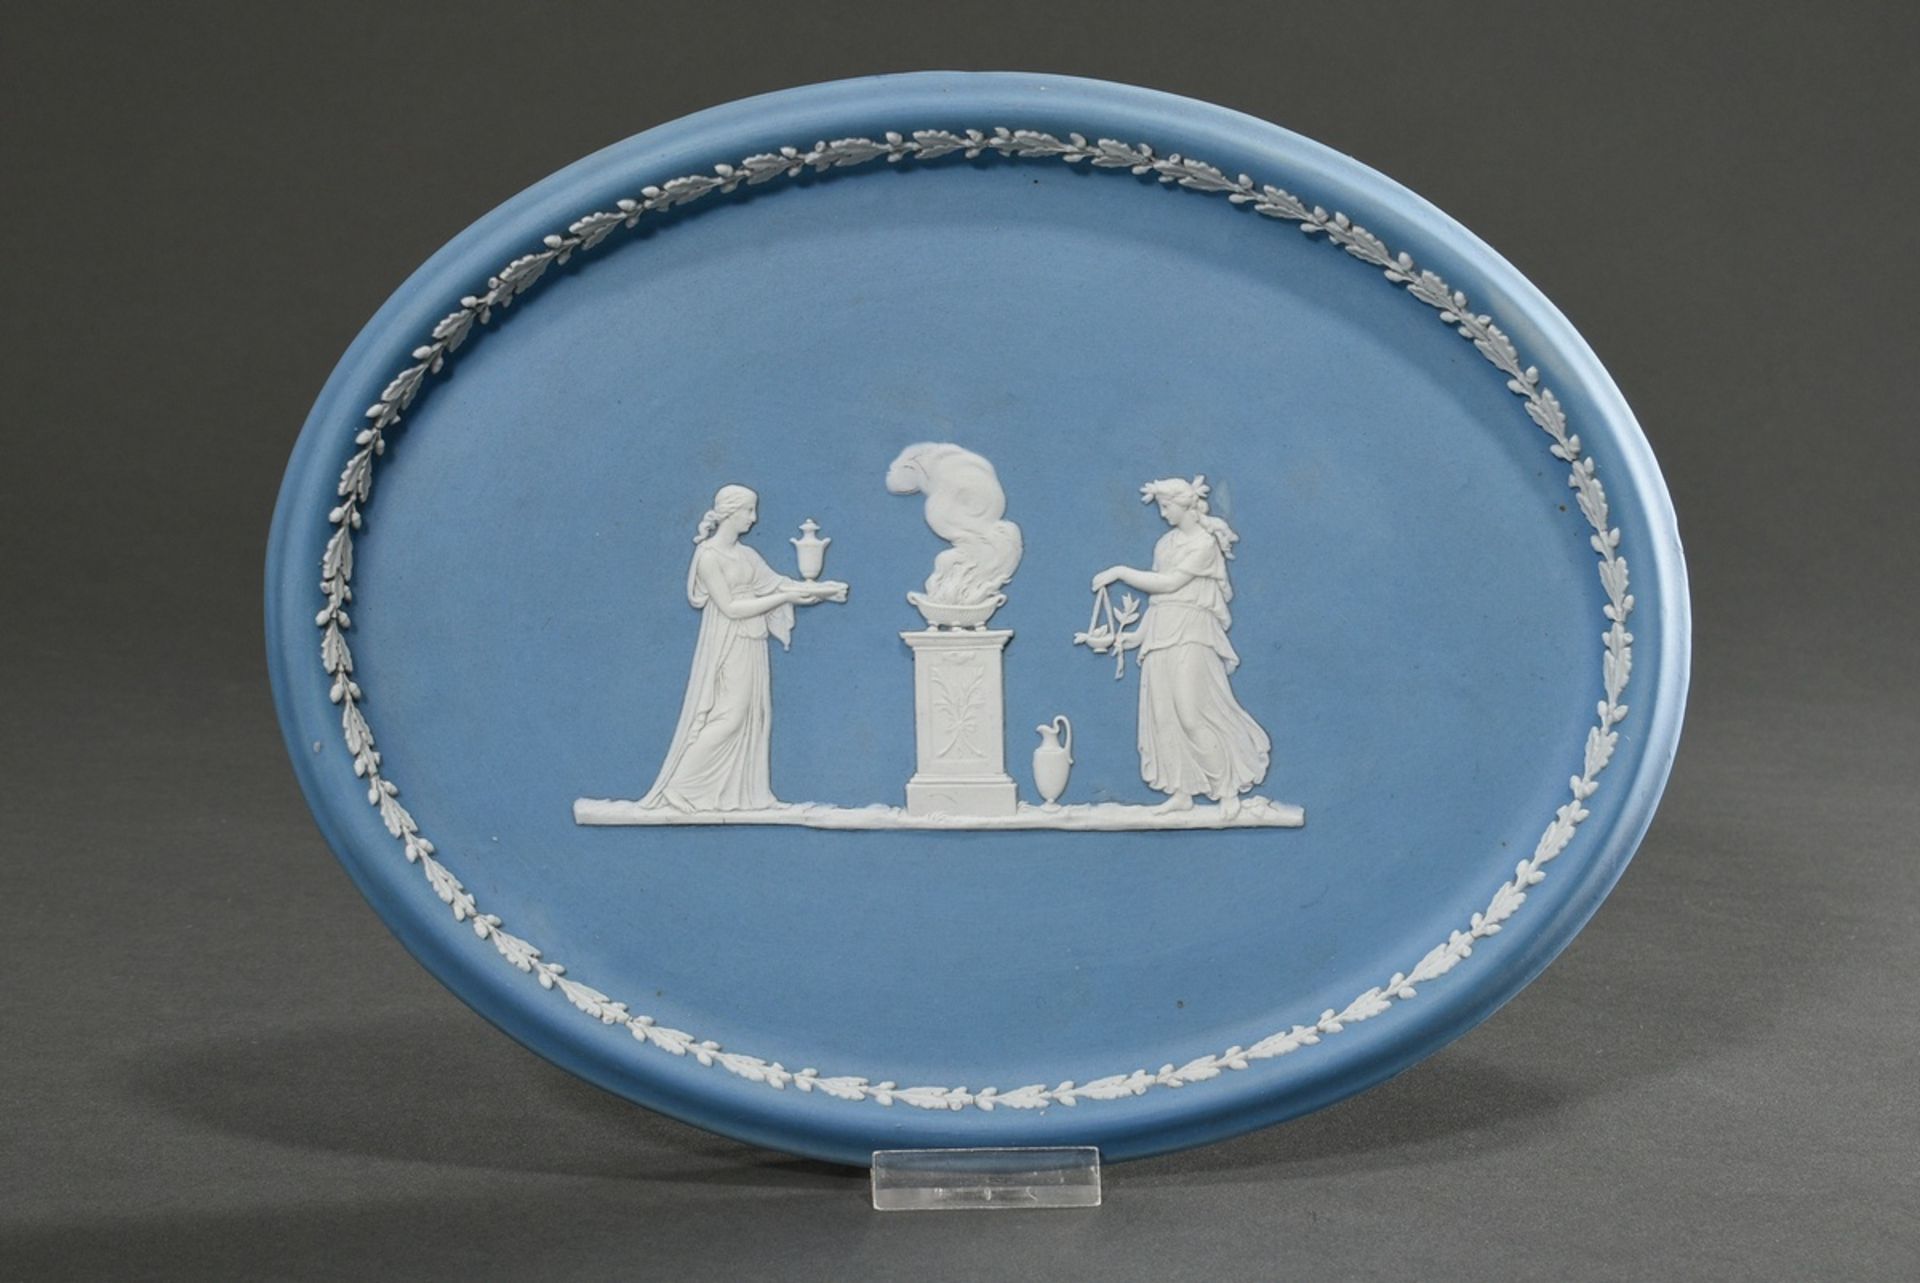 3 Various pieces of Wedgwood Jasperware Solitaire with classic bisque porcelain reliefs on a light  - Image 2 of 8